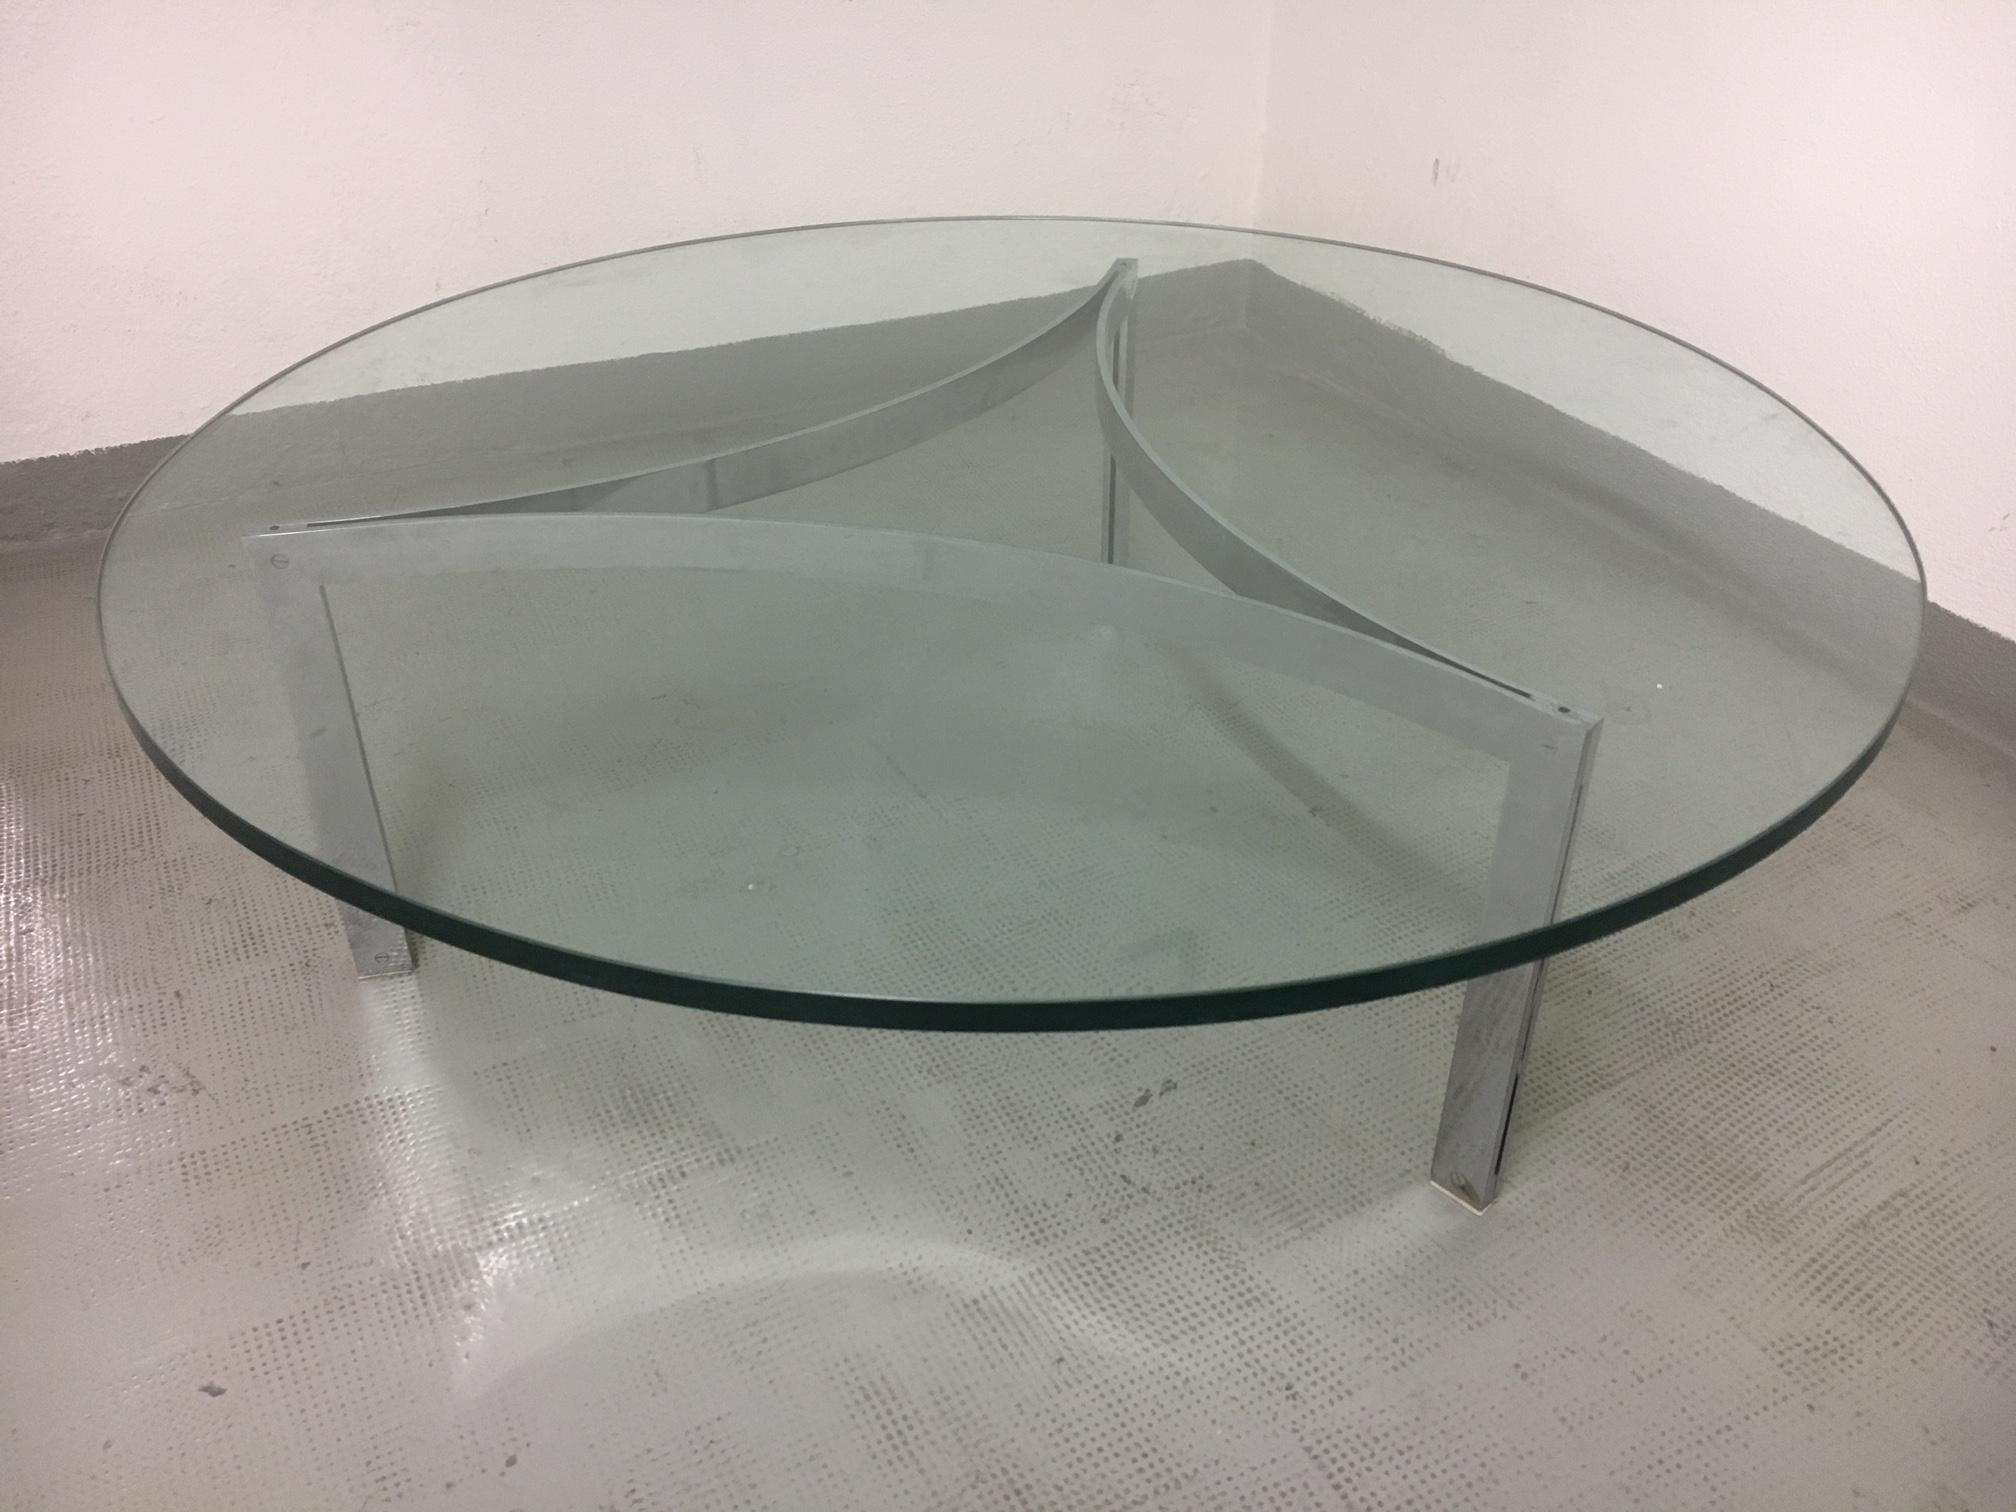 Chromed steel and thick glass top coffee table designed by Henri Ganz and produced by Stending, Switzerland ca. 1960s
Measures: 120 cm diameter, 40 cm high.
The table can be sold without the glass top. Contact us.